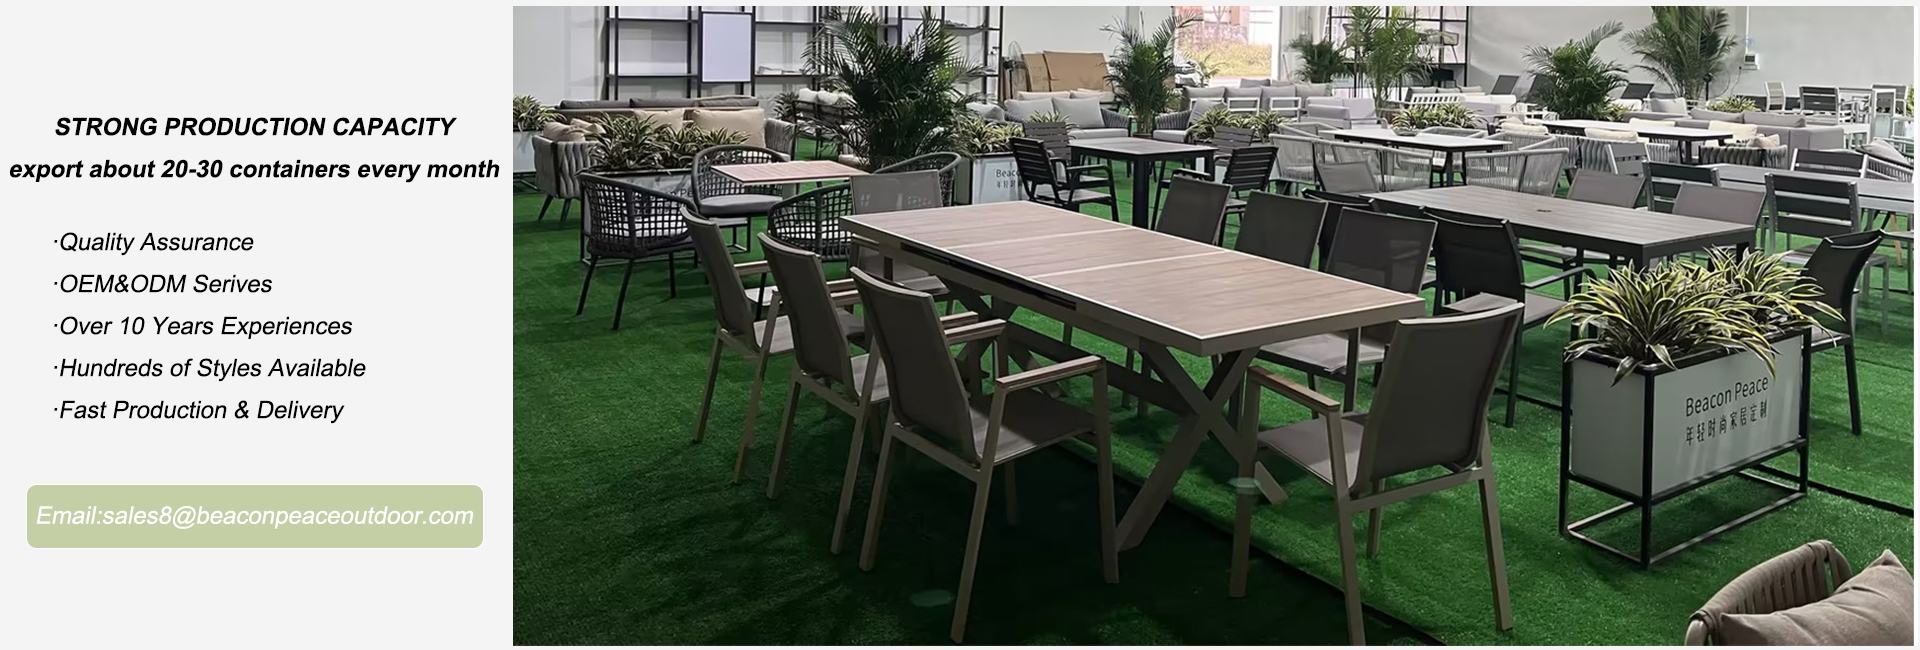 Strong production capacity garden furniture manufacturer